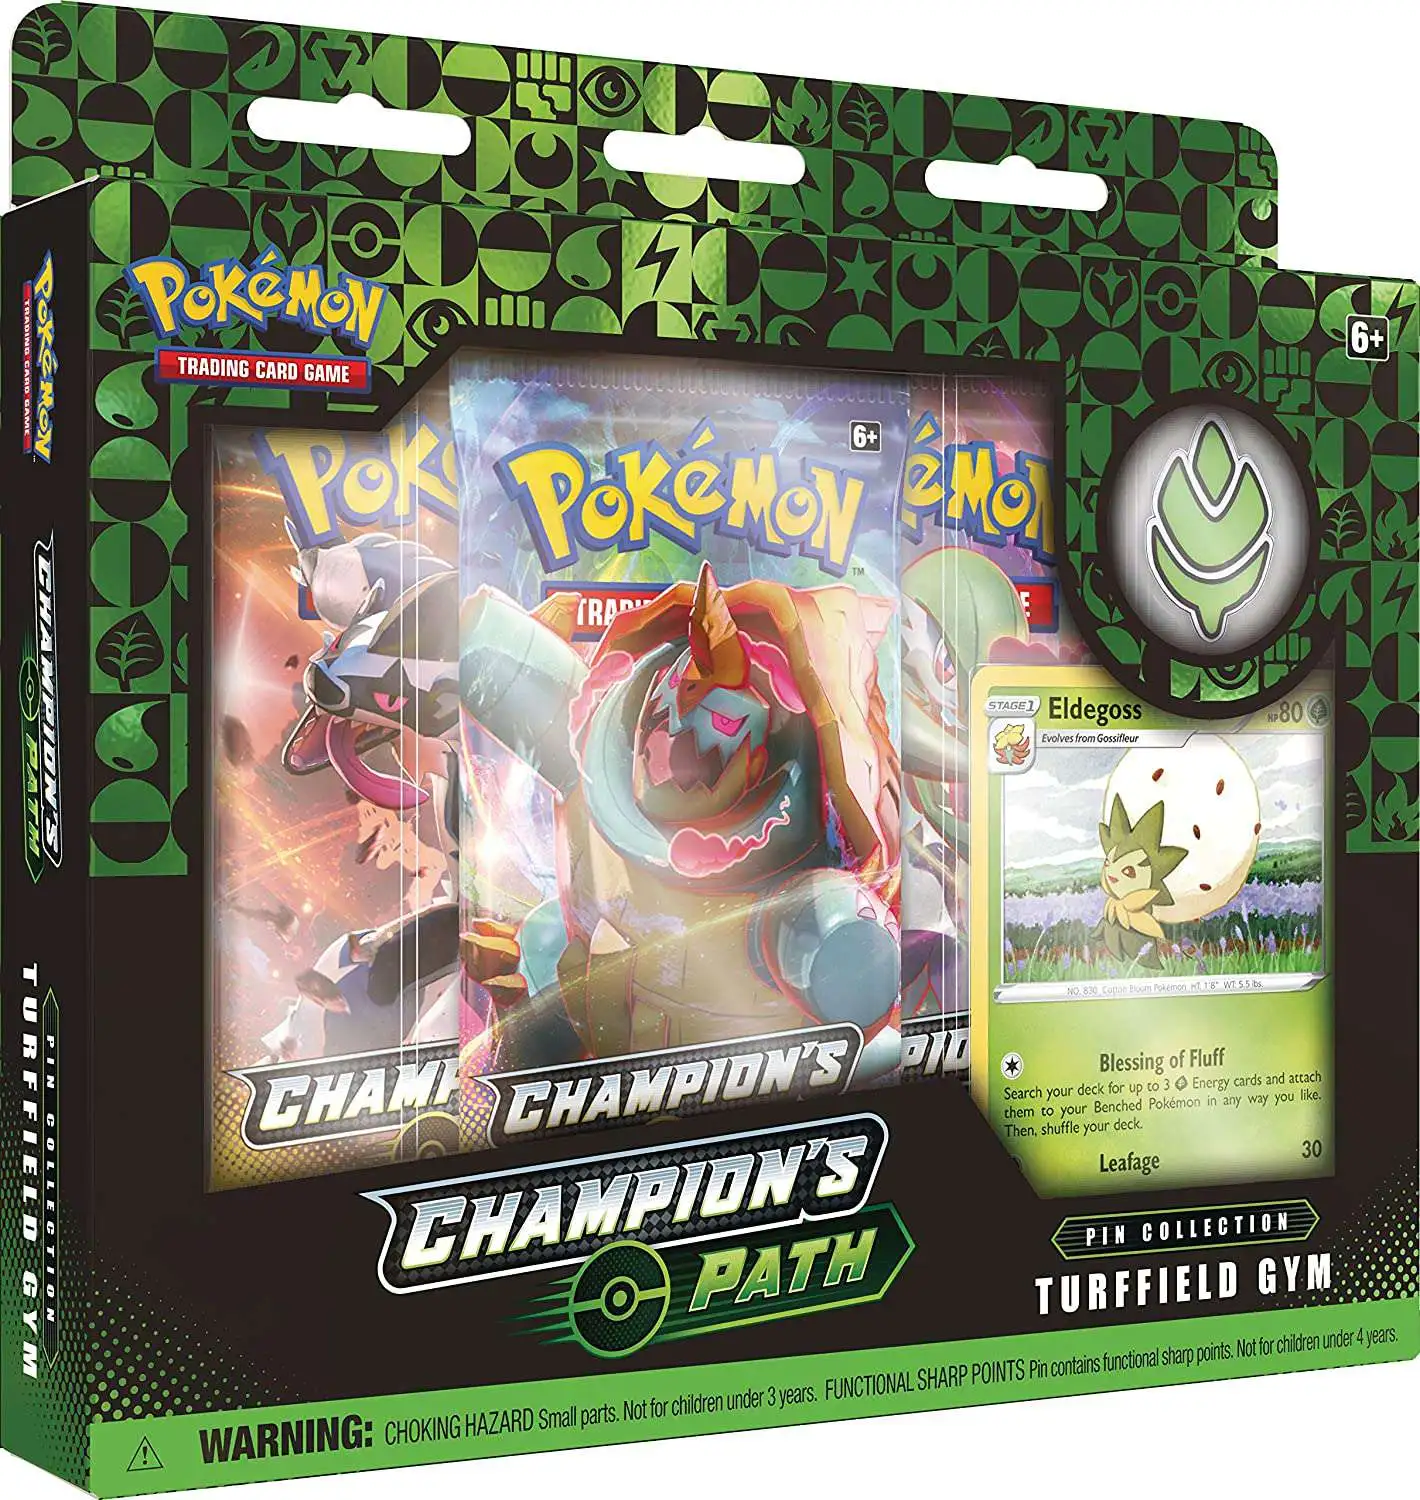 Pokémon TCG Champions Path Dubwool V Collection Booster Box for sale online 